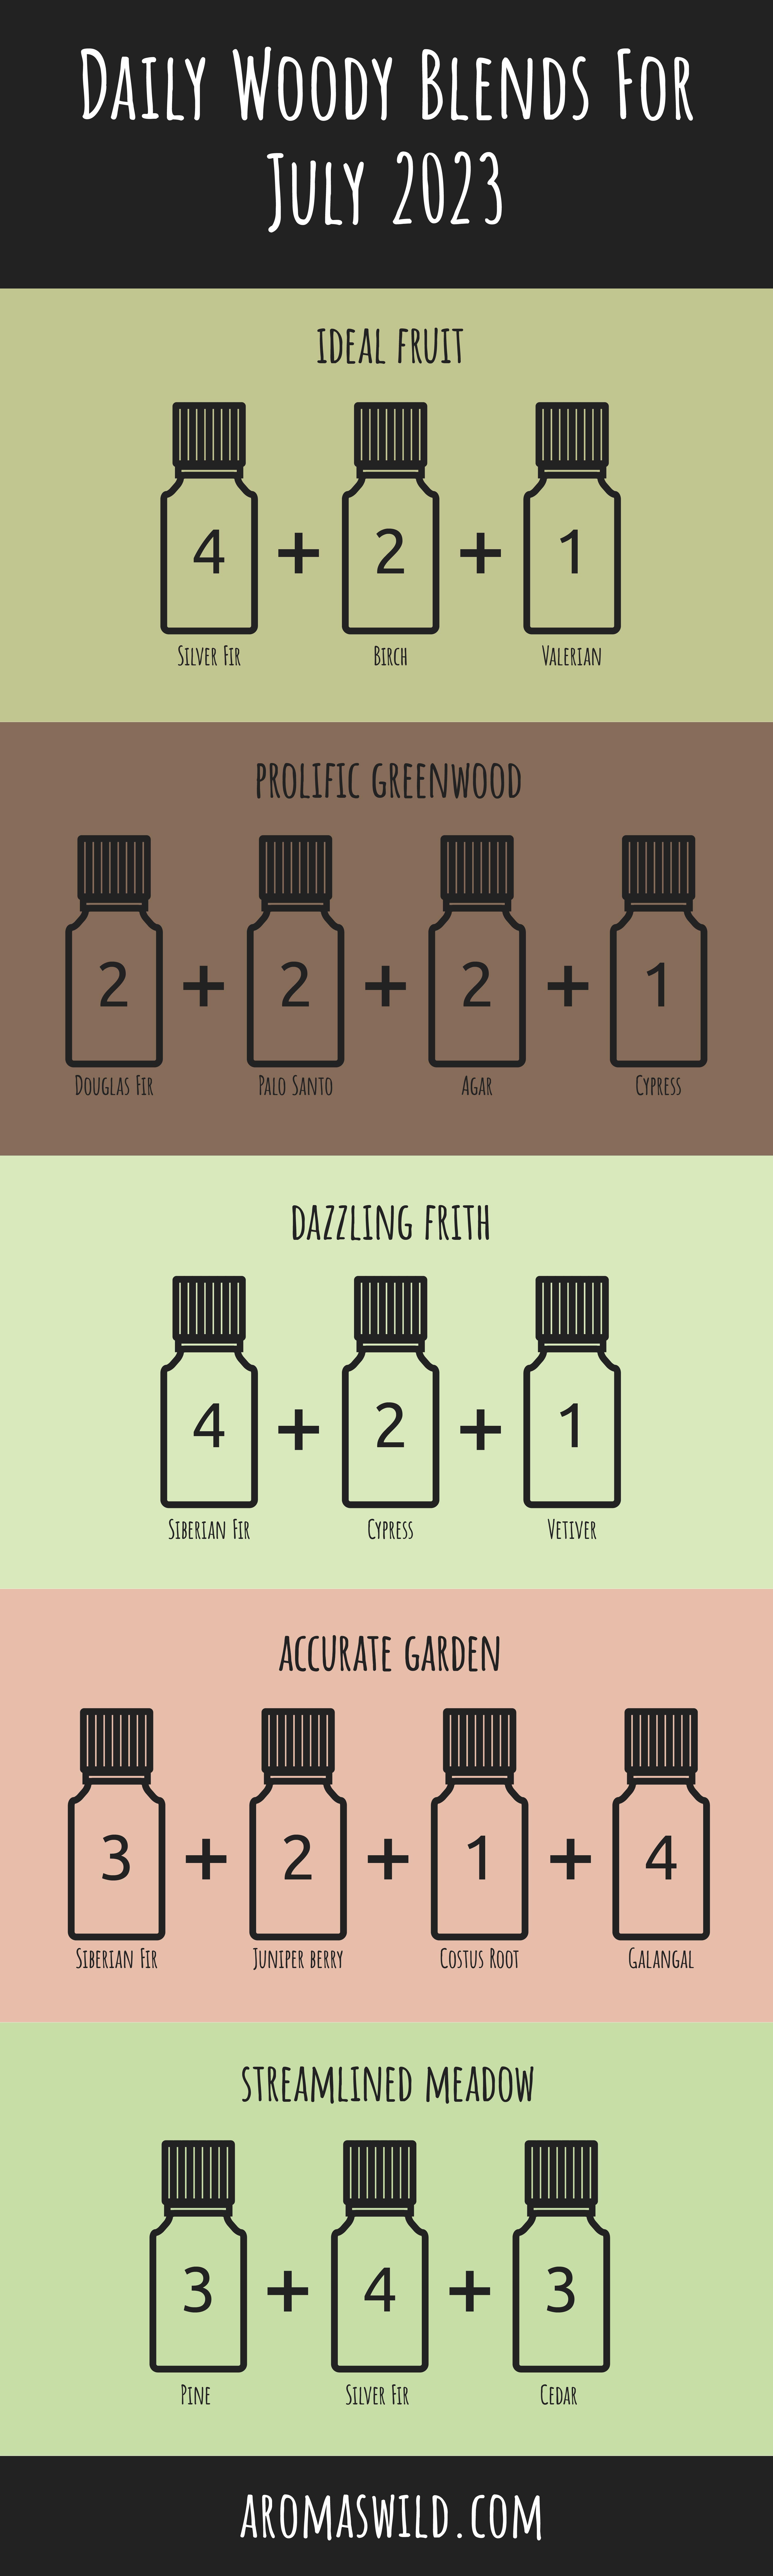 DIY Wood Scented – Daily Woody Blends For 5 July 2023